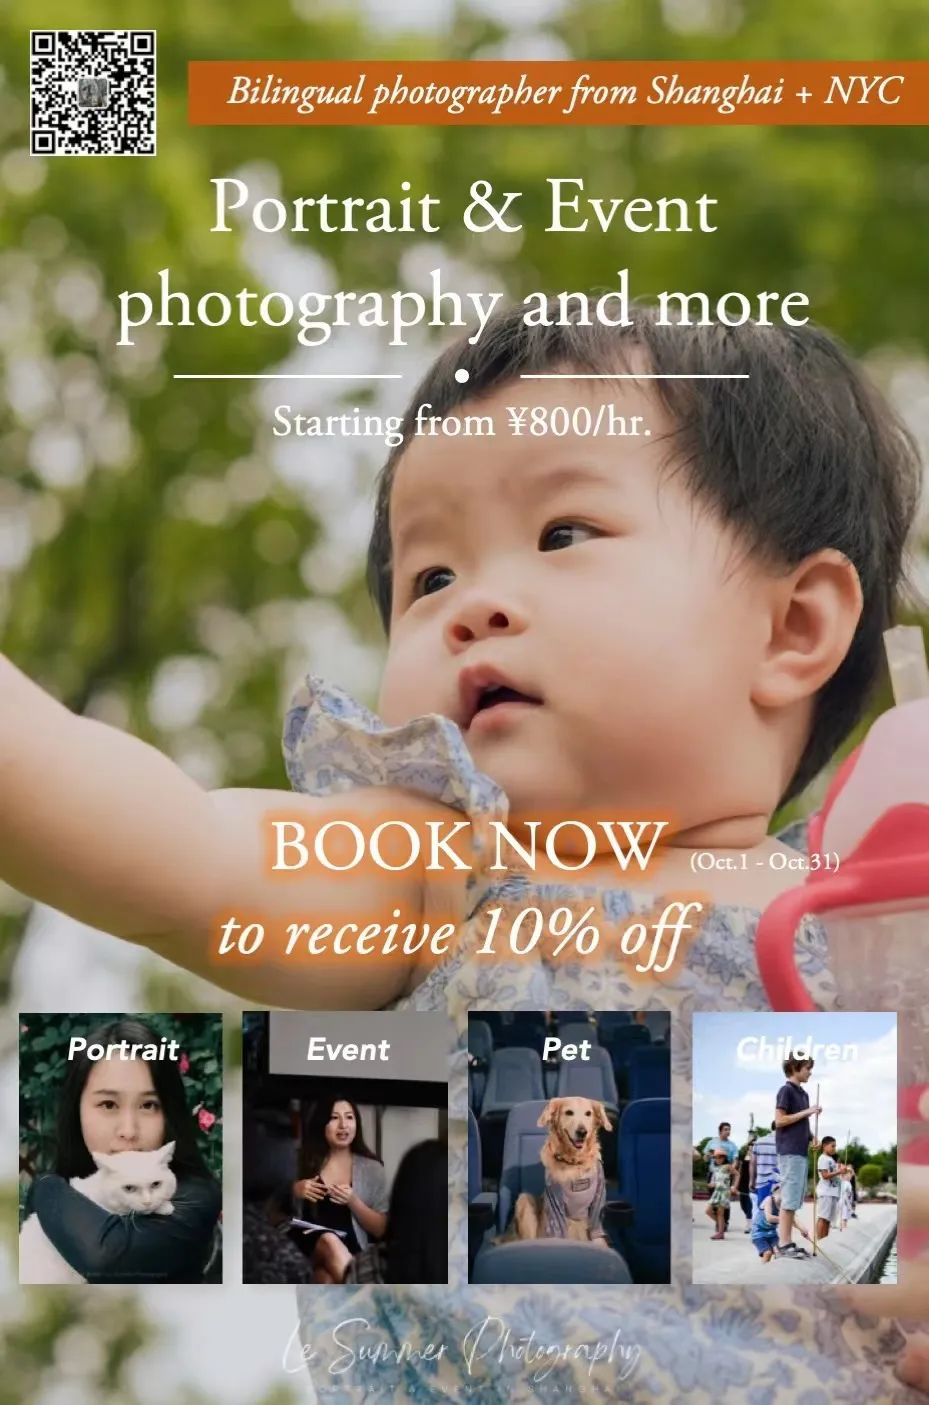 Potrait&Event photography and more